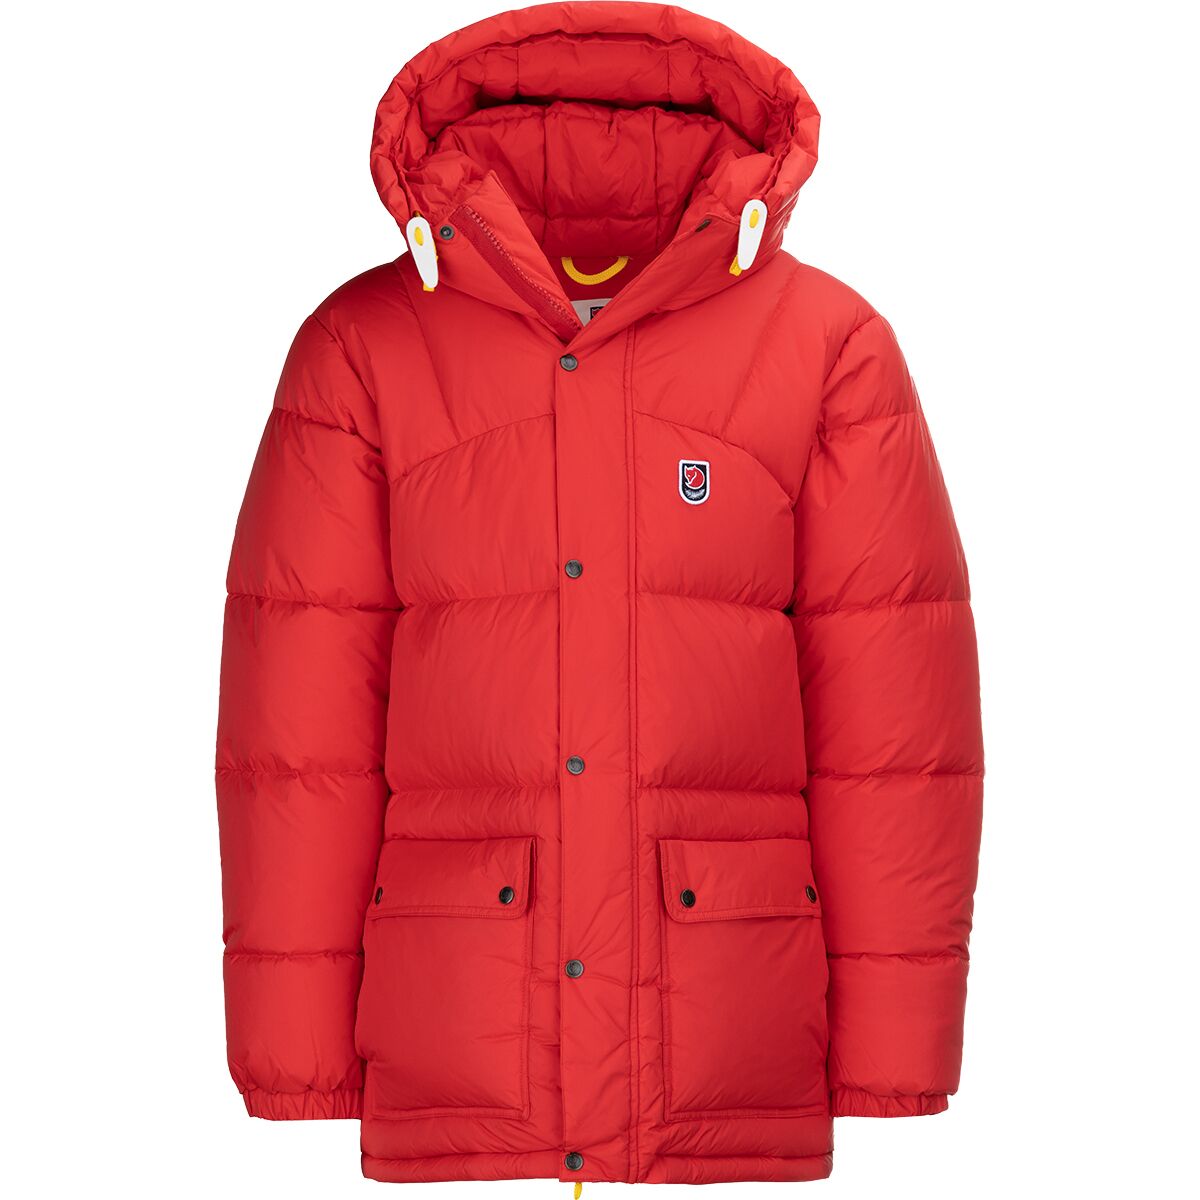 Expedition Down Jacket - Men